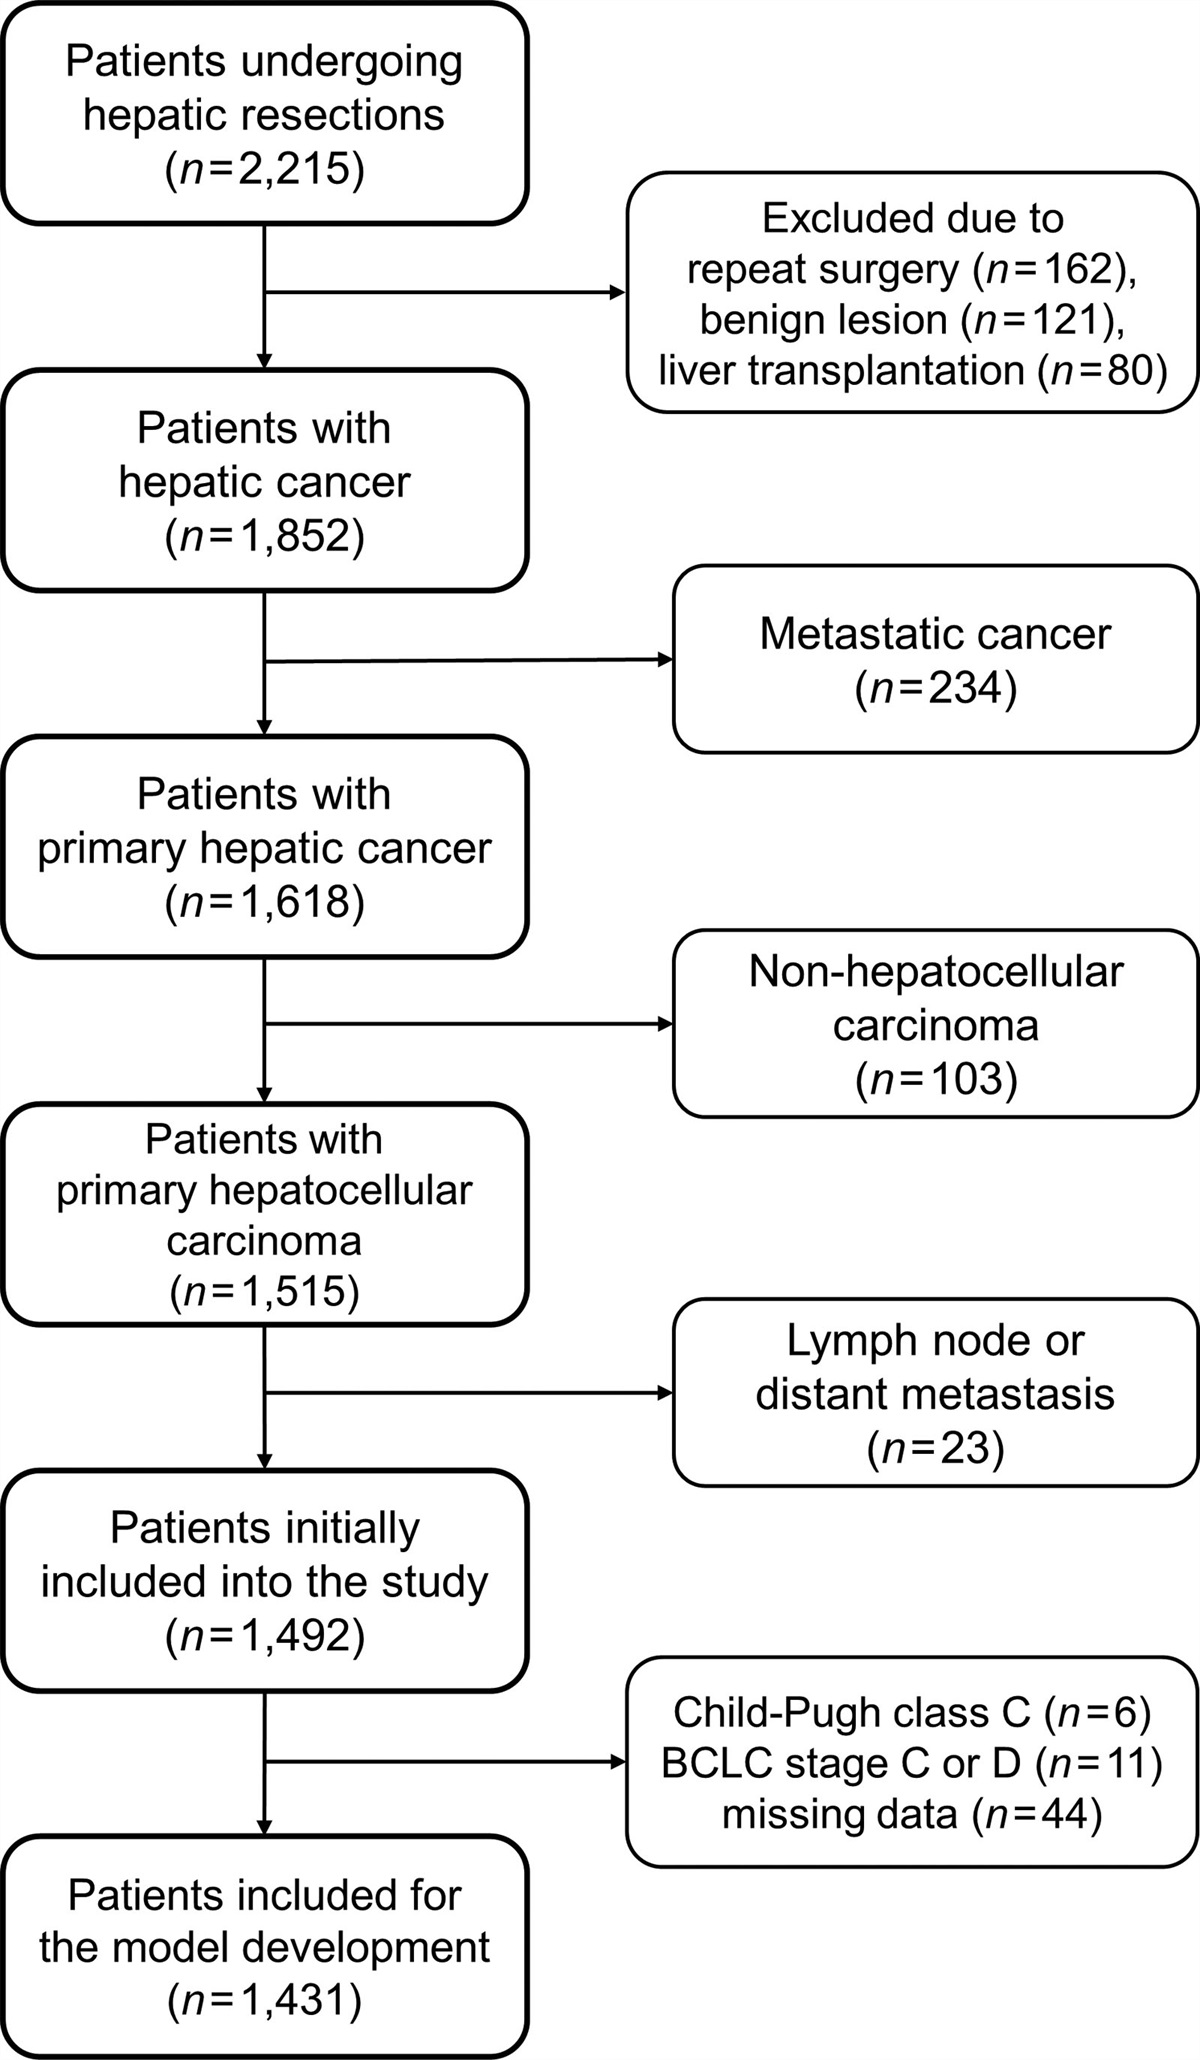 A predictive model incorporating inflammation markers for high-grade surgical complications following liver resection for hepatocellular carcinoma